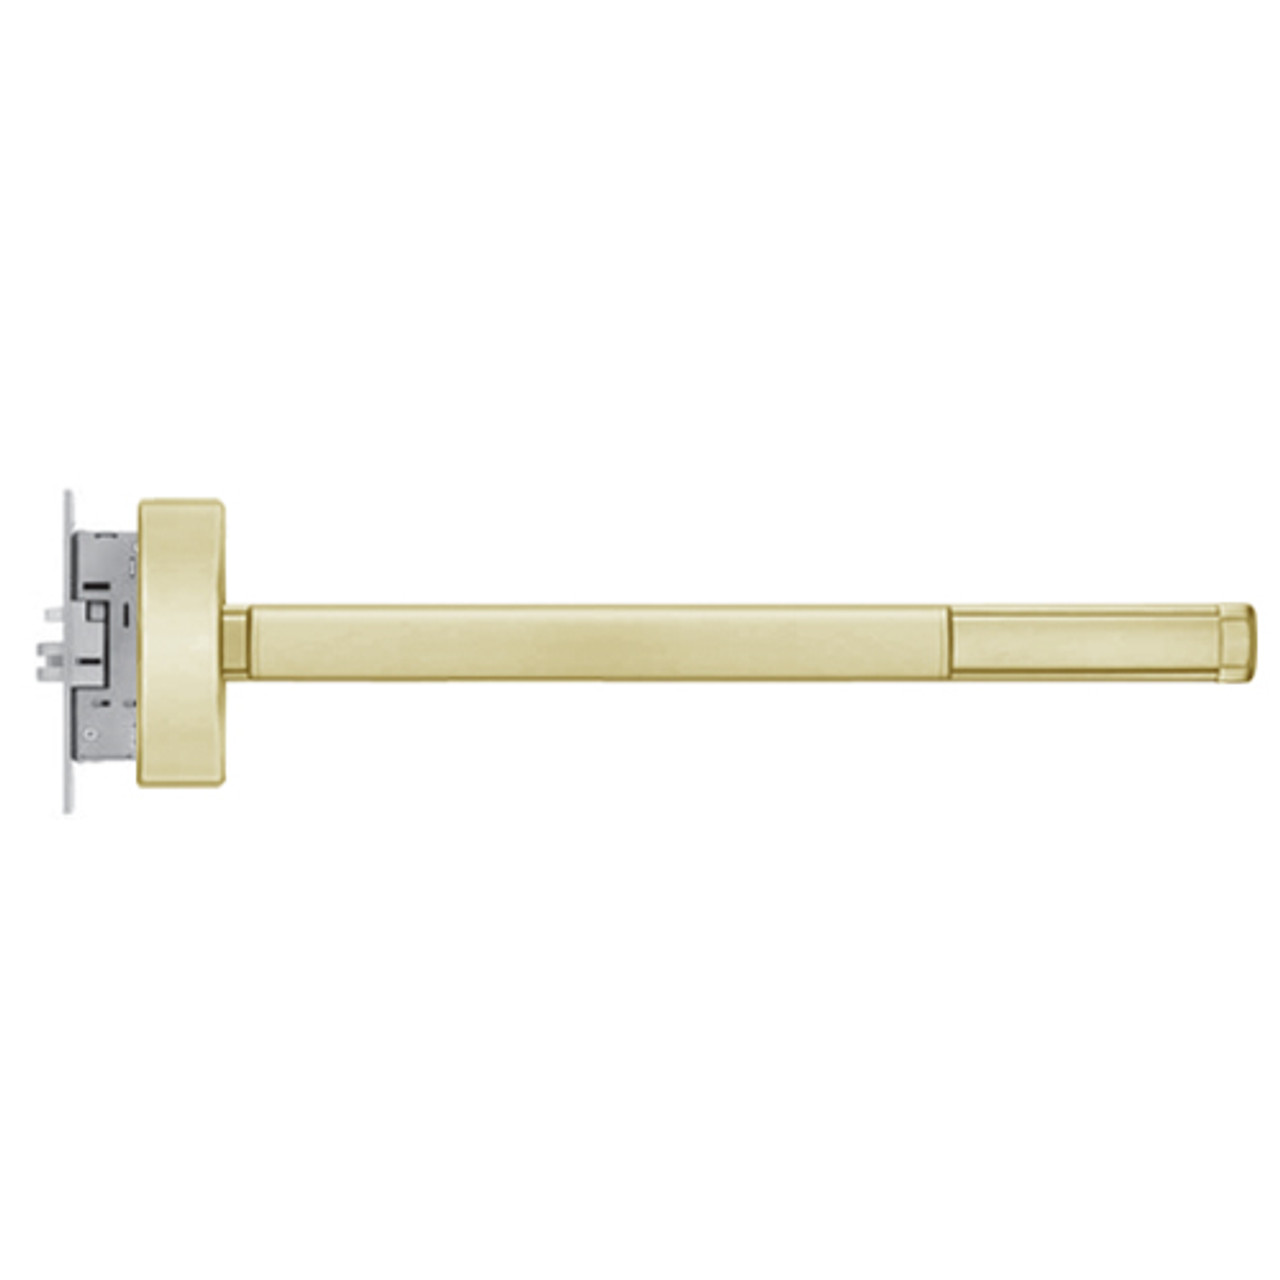 FL2305-LHR-606-36 PHI 2300 Series Fire Rated Apex Mortise Exit Device Prepped for Key Controls Thumb Piece in Satin Brass Finish